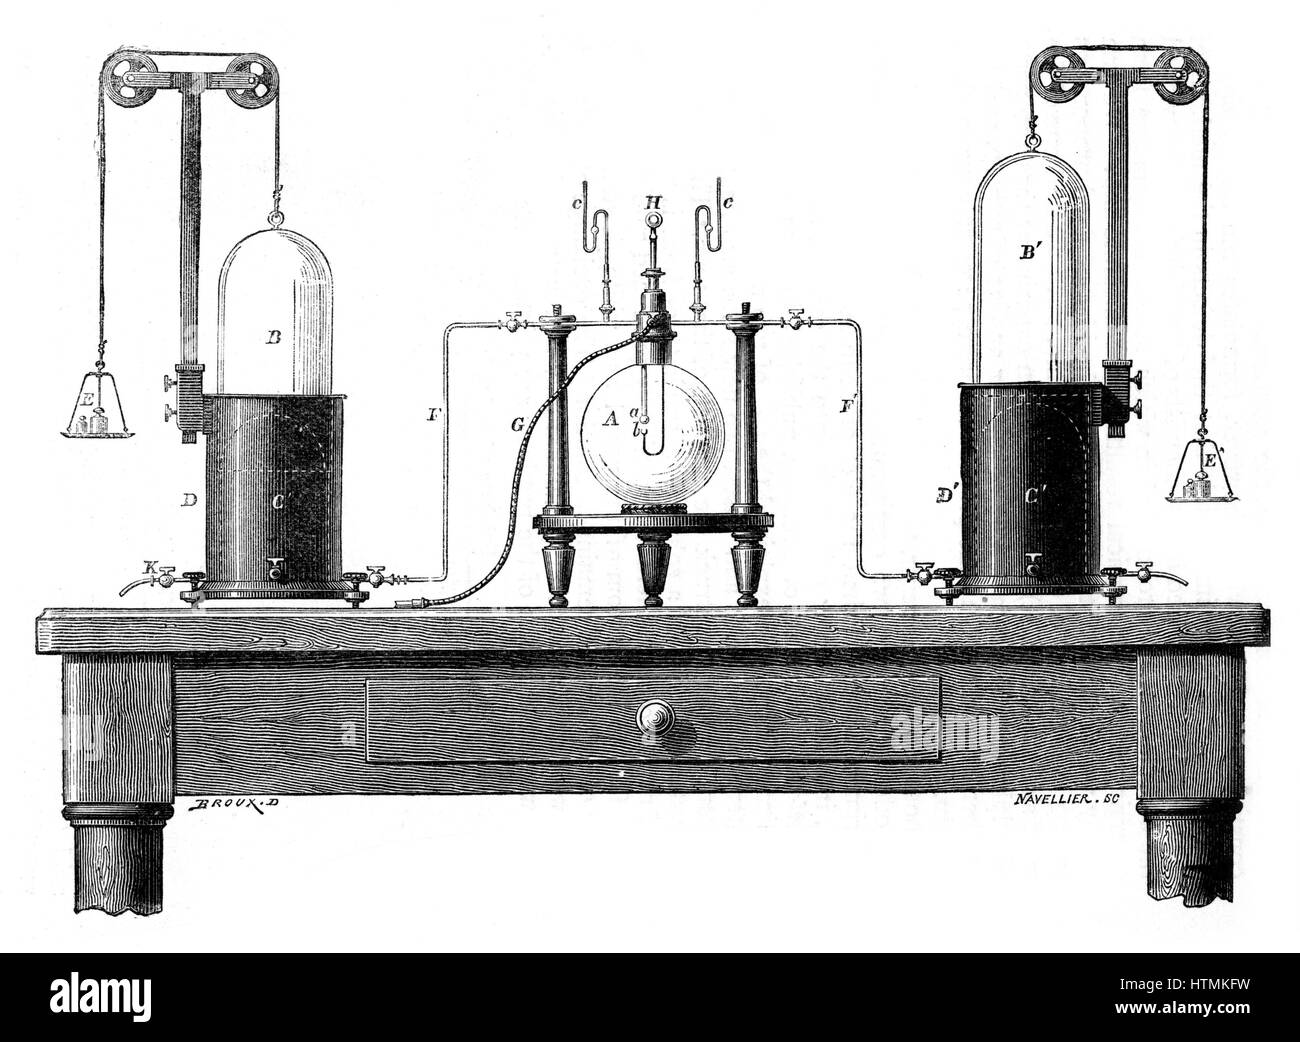 Lavoisier's apparatus for synthesizing water from hydrogen (left) and oxygen (right). From Robert Routledge 'A Popular History of Science', London, 1881. Antoine Laurent Lavoisier (1743-94) French chemist. Engraving Stock Photo